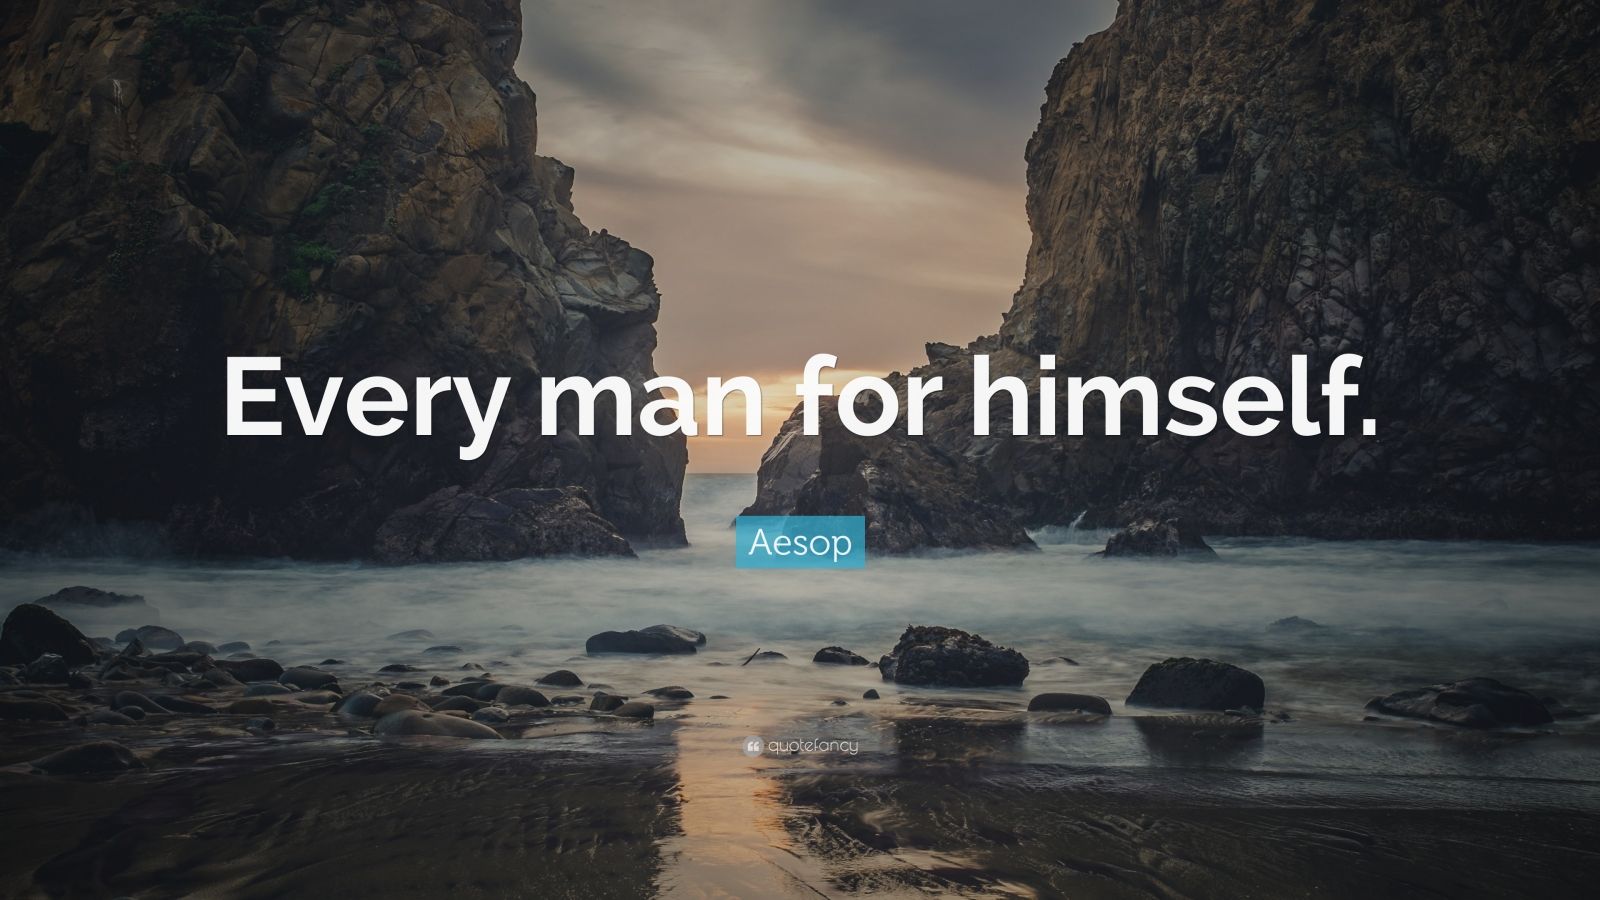 Aesop Quote “Every man for himself.”